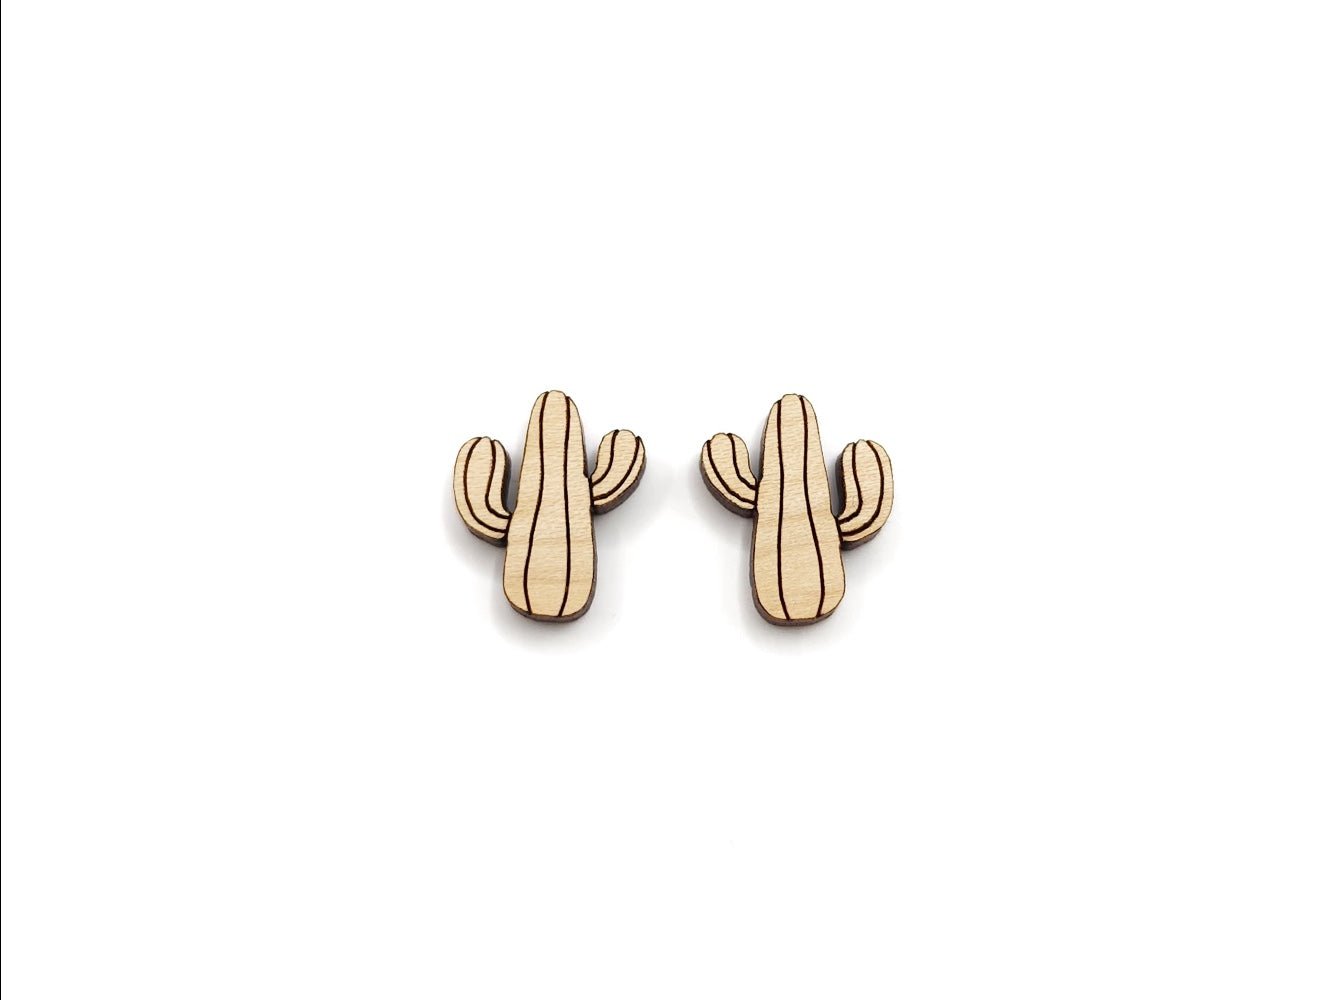 a pair of wooden cabochon stud earring blanks cut and engraved to look like a saguaro cactus